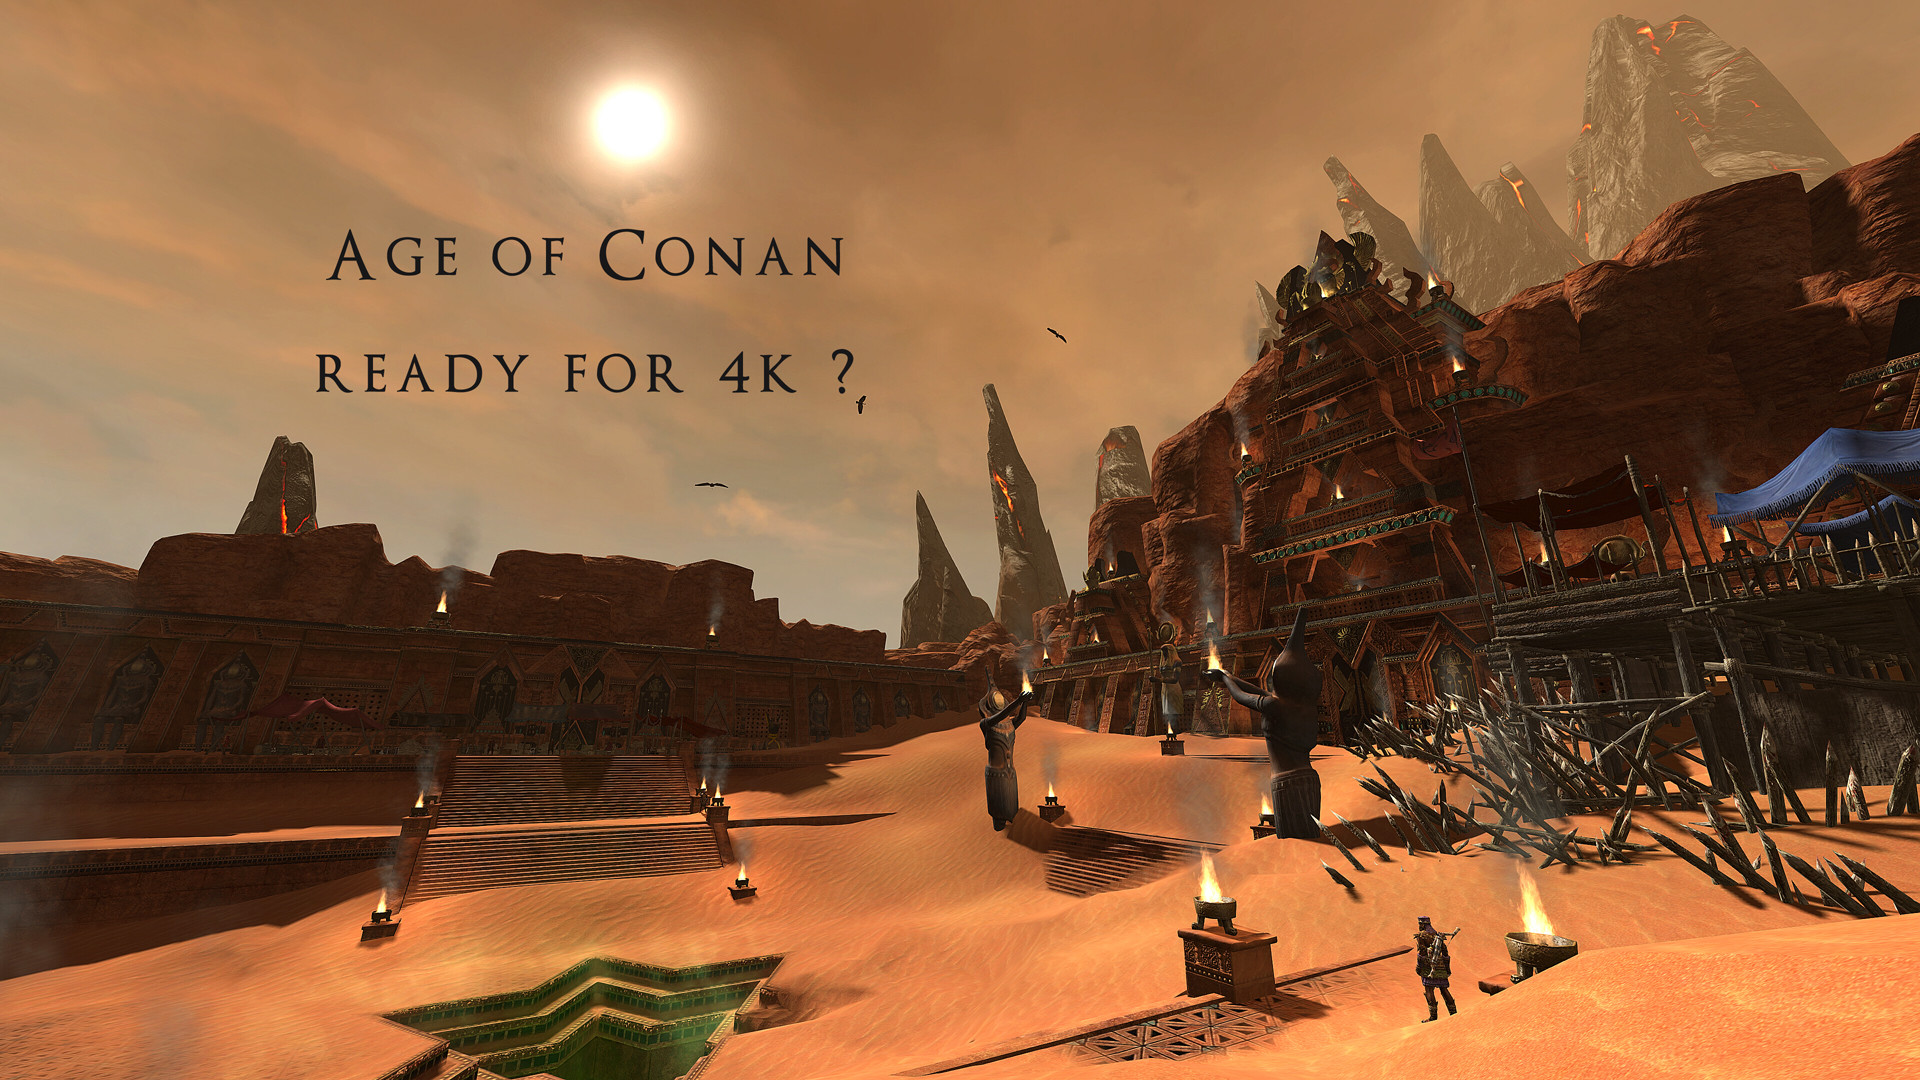 1920x1080 Recently I had bought a new 4K monitor (SAMSUNG U28D590D). I faced quite a  lot of problems to play Age of Conan in 4K resolution, just want to share  the ...